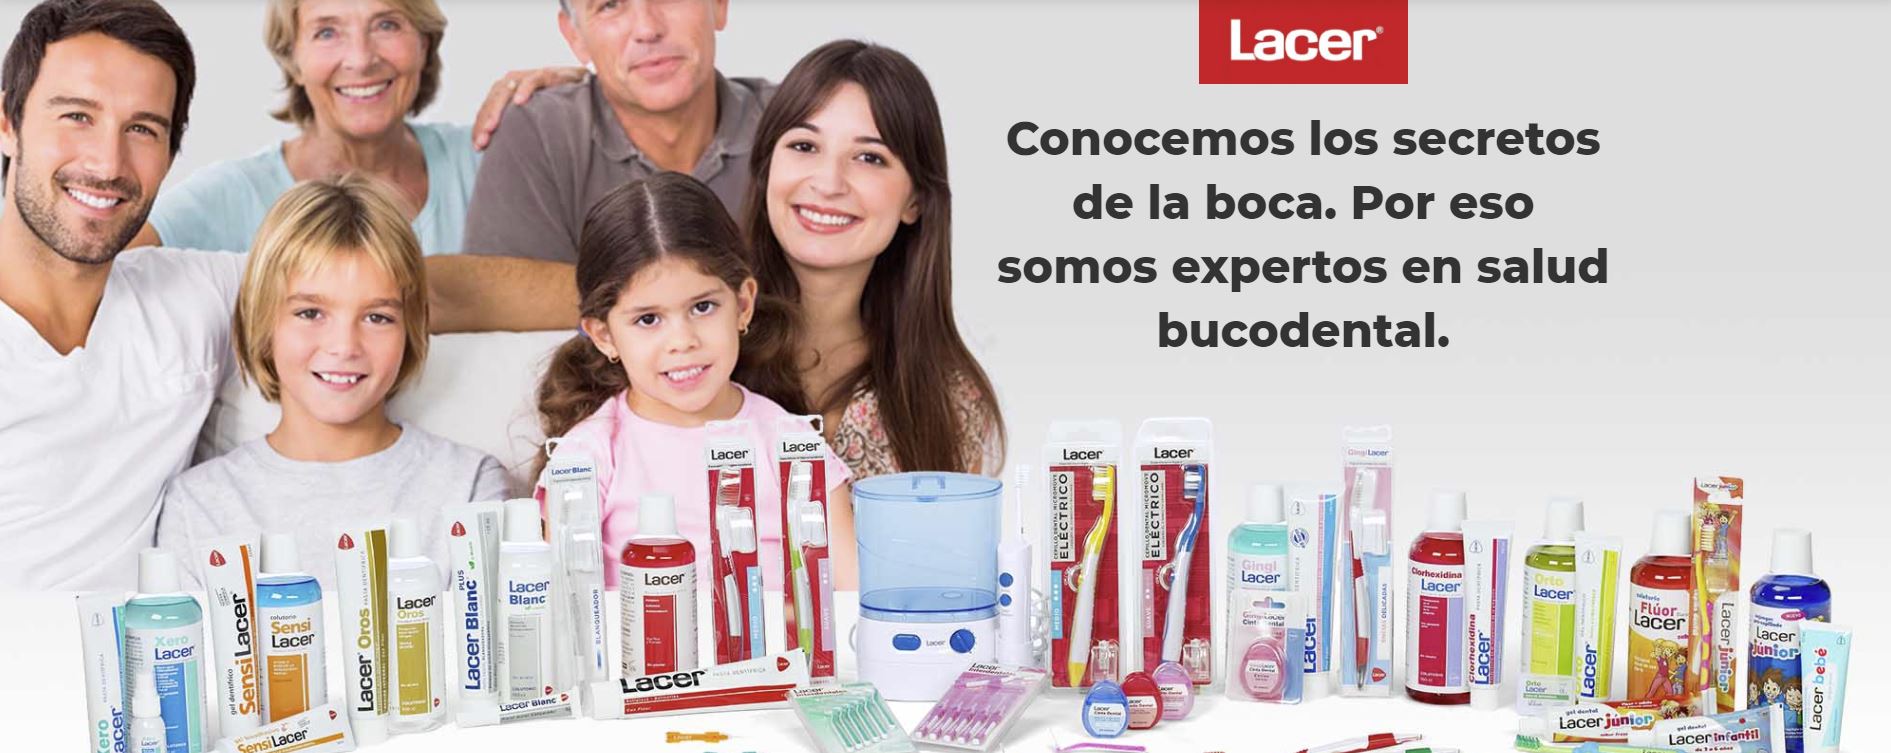 LACER Productos